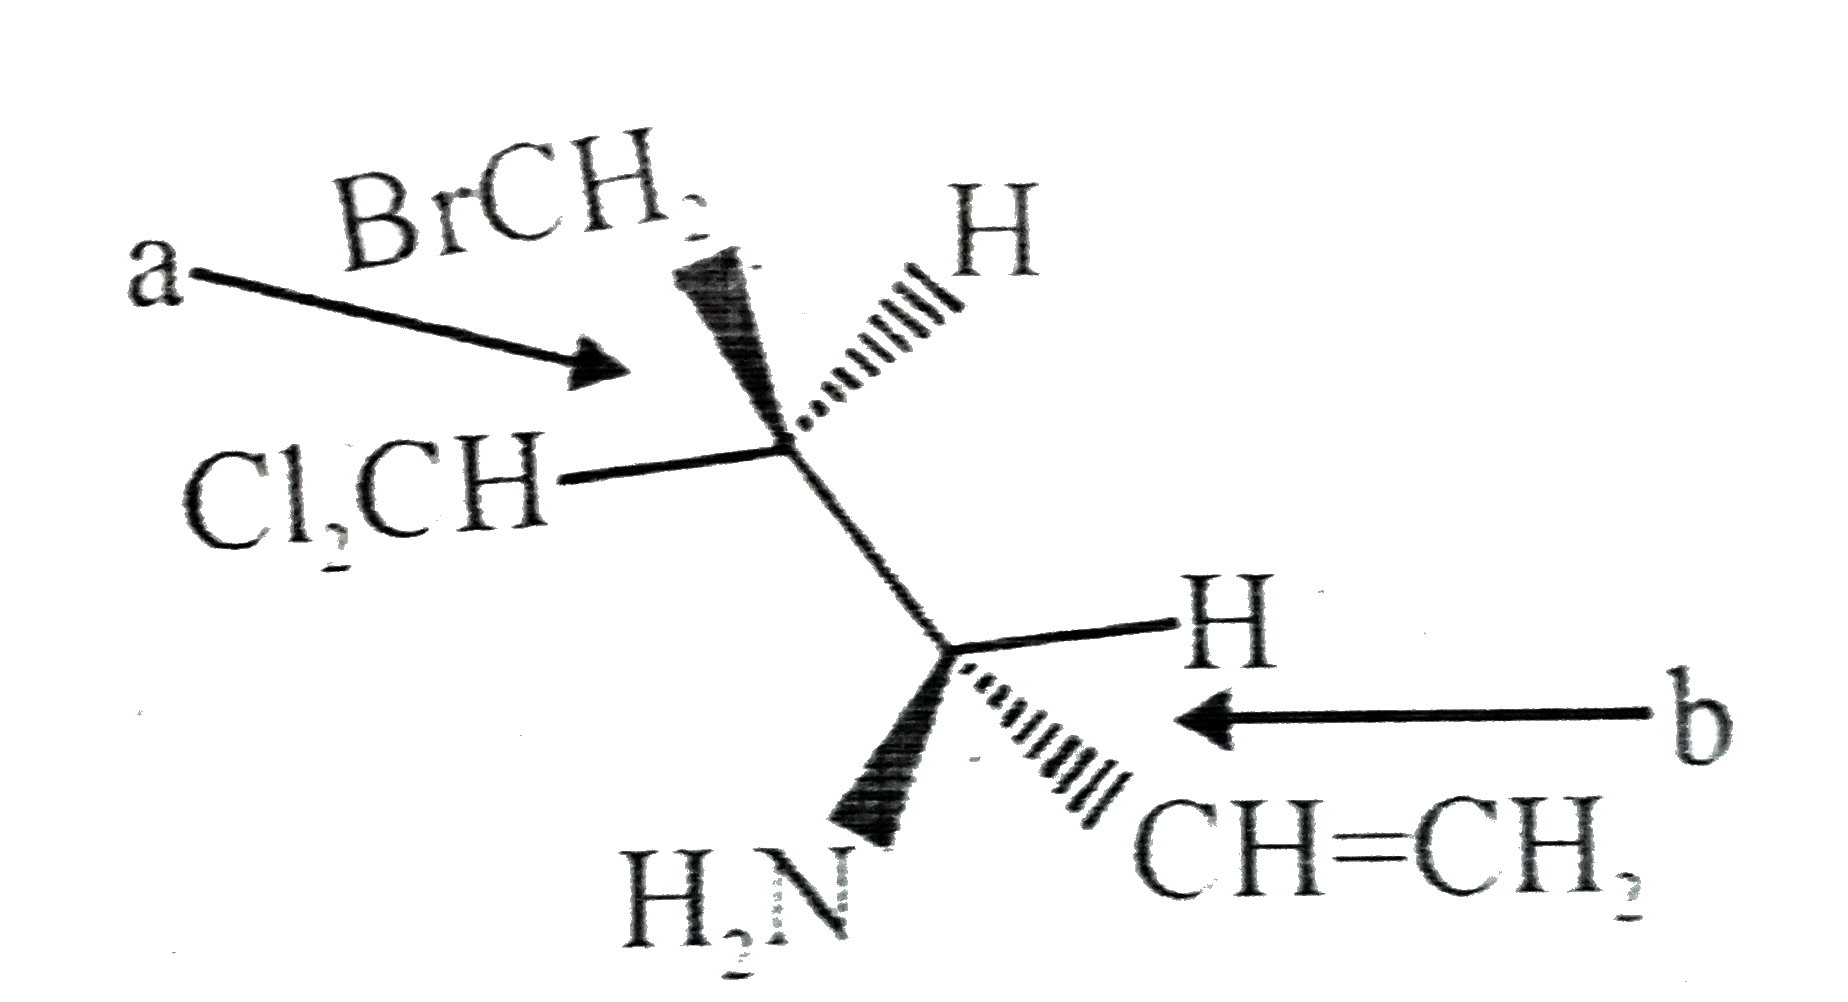 Label each stereogenic center in the following compound as R or S.